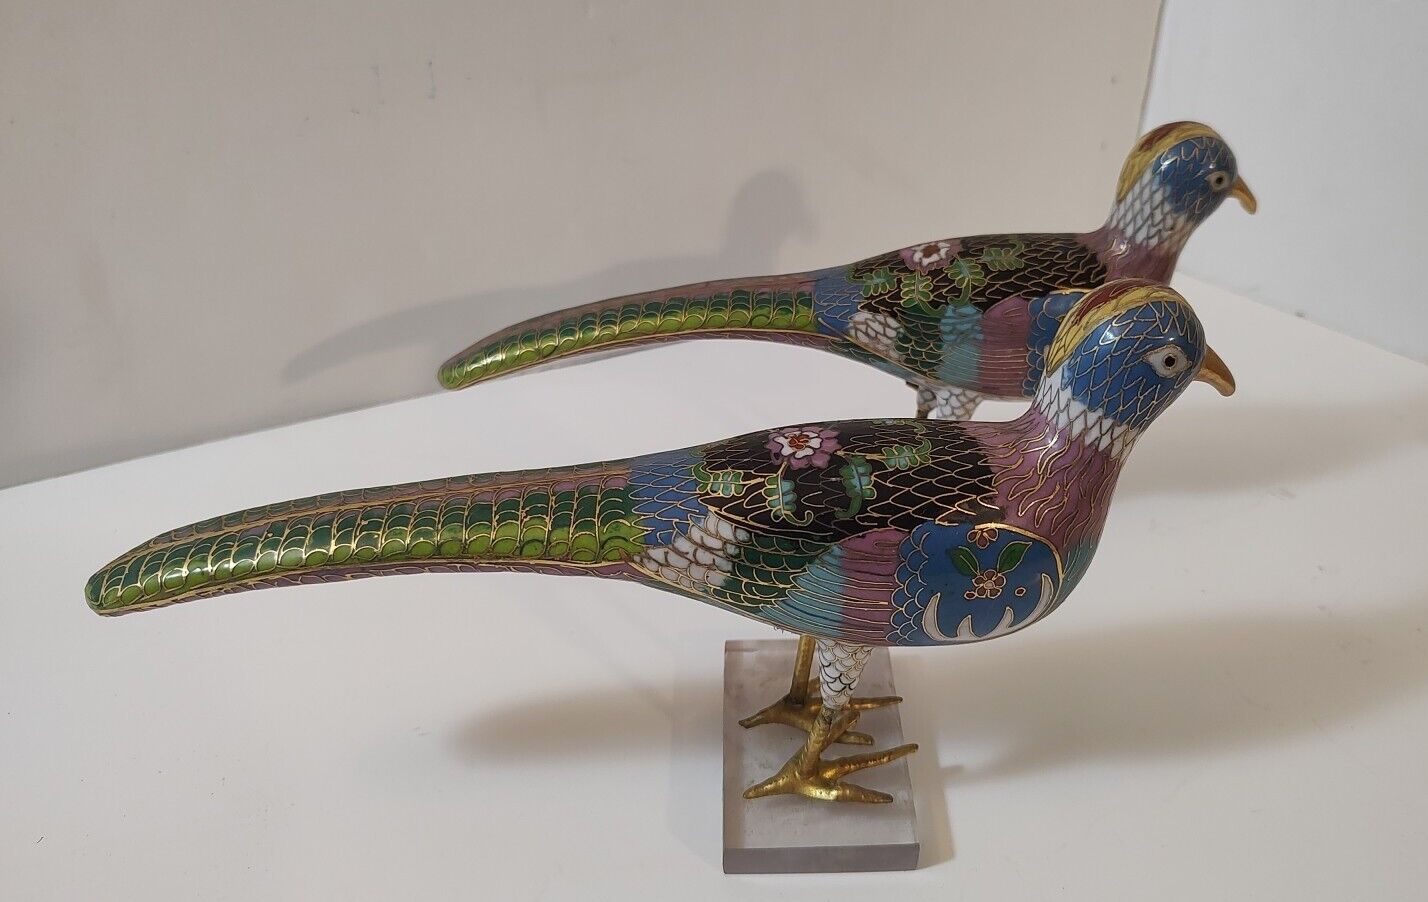 VTG Pair Of Chinese Cloisonne Long Tailed Bird Figurines 9x6 Made In Bejing